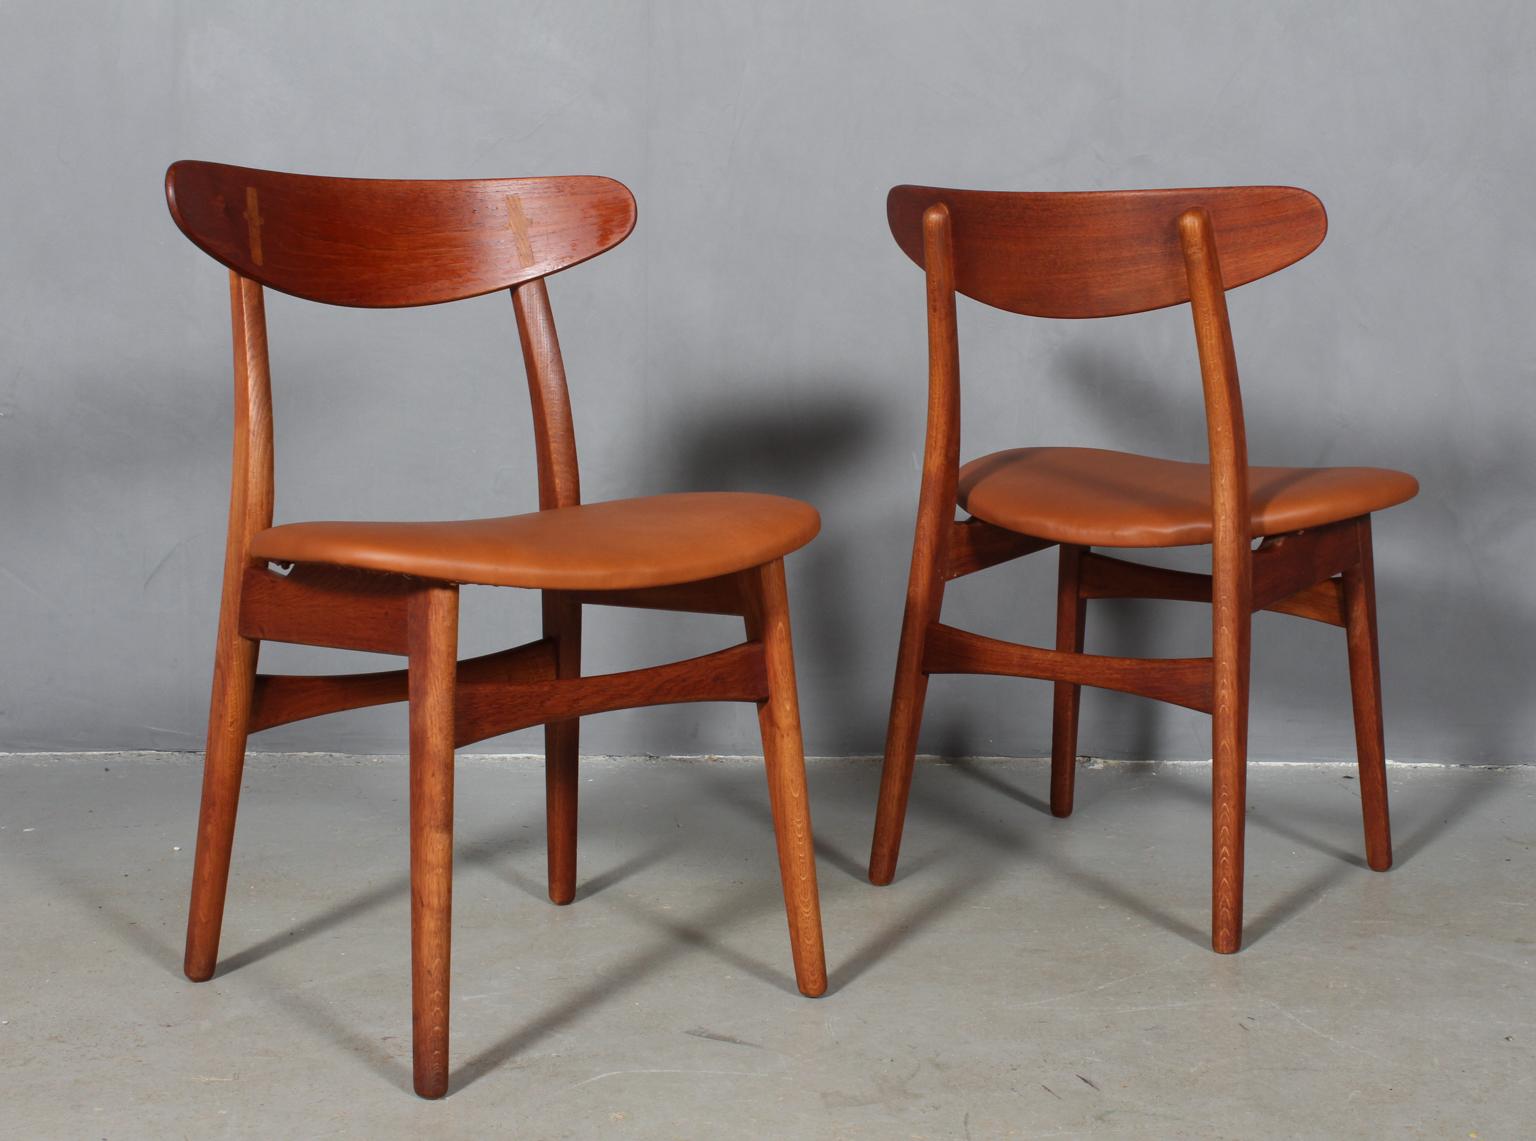 Set of four Hans J. Wegner dining chairs in teak and oak.

New upholstered with walnut elegance aniline leather.

Made by Carl Hansen. 

The CH-30 was originally designed in 1952 and was one of Wegner’s first chairs. The design has become a